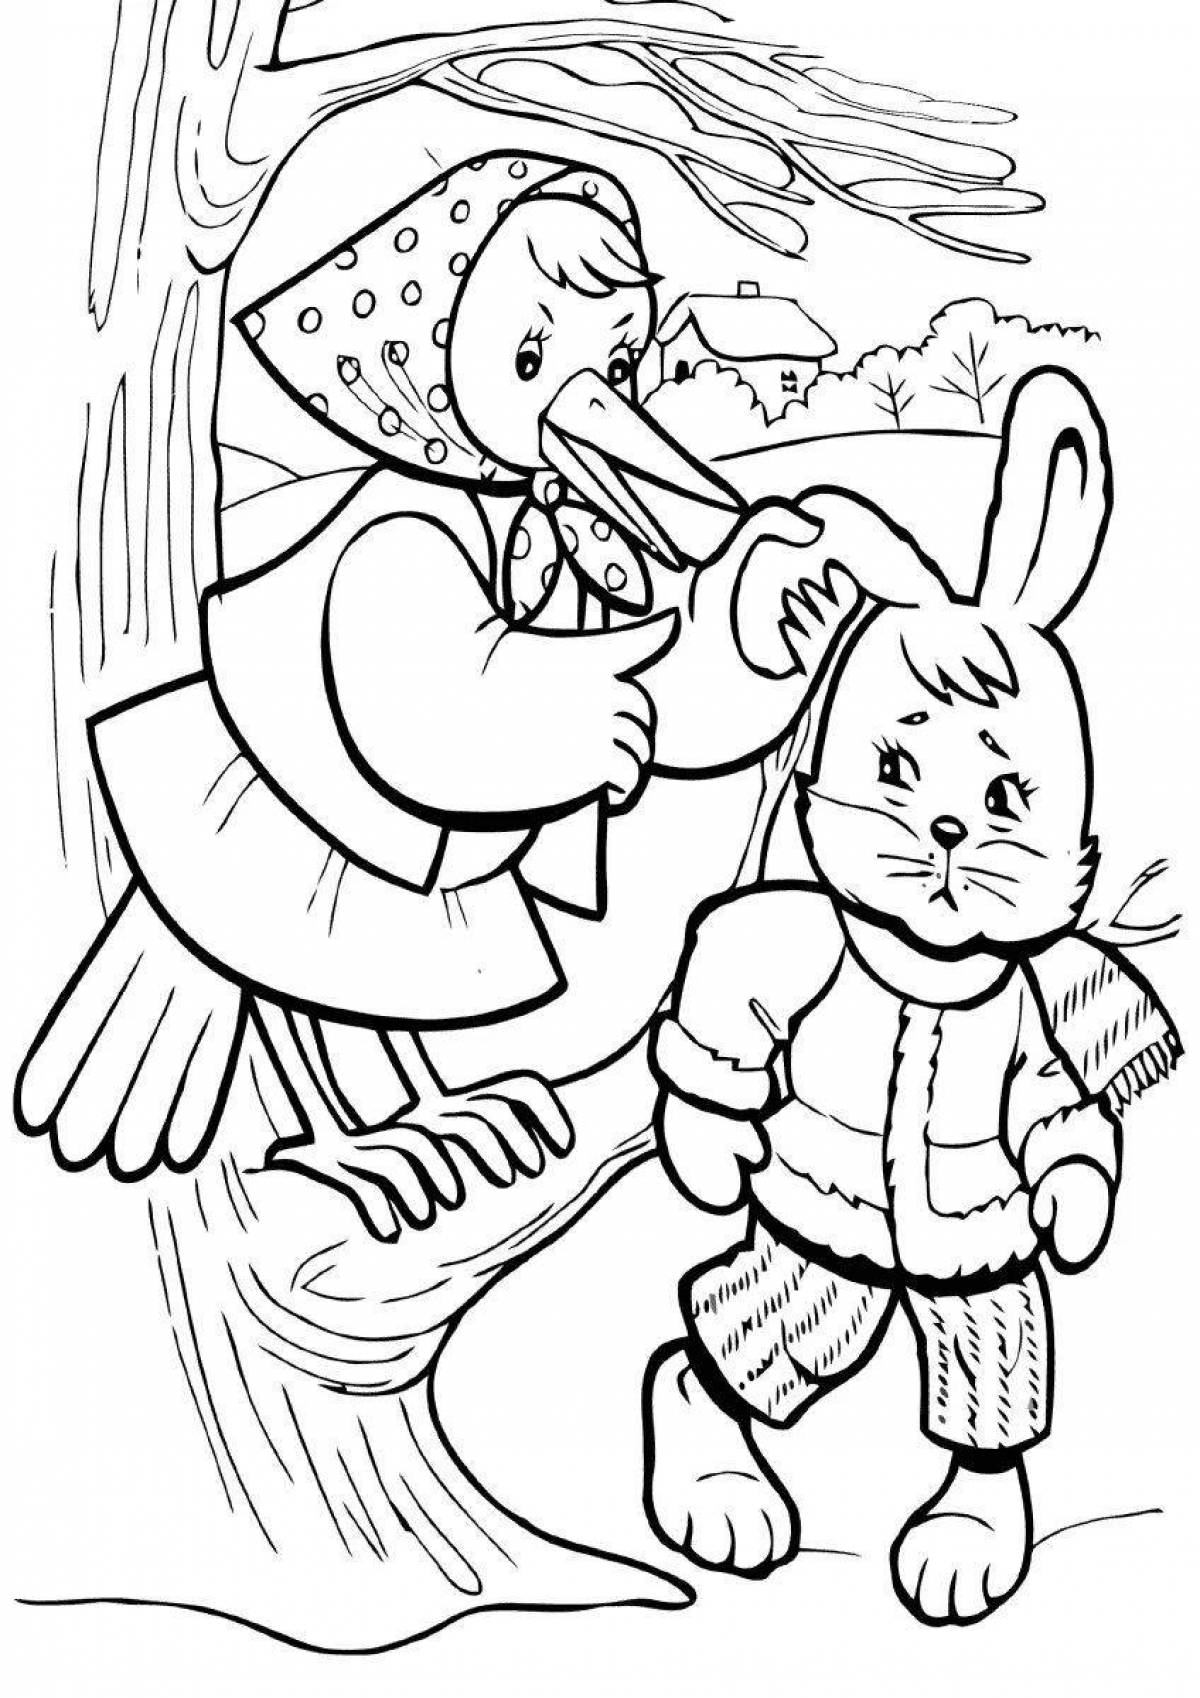 Enticing coloring pages heroes of Russian folk tales